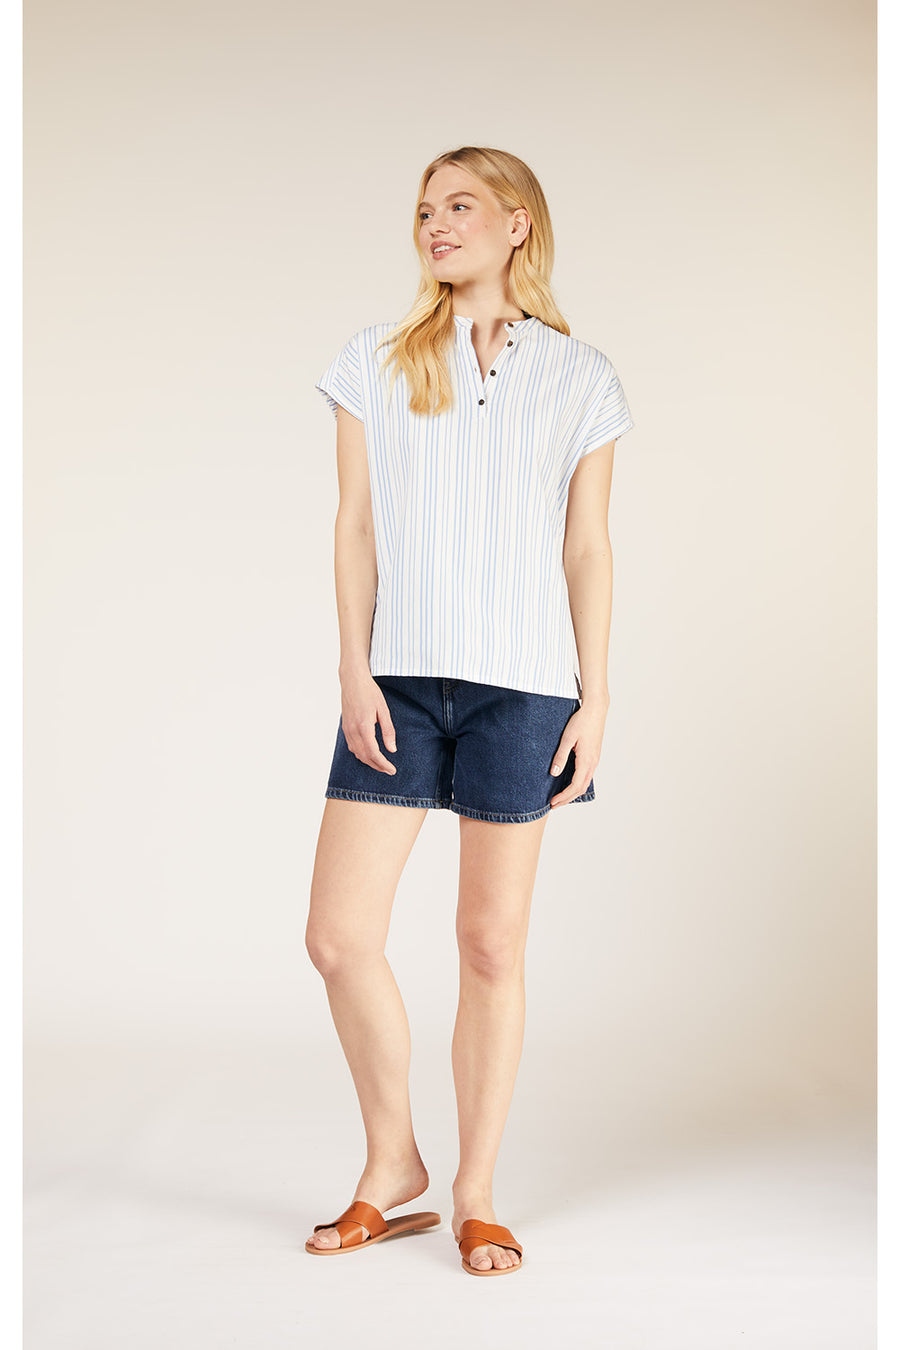 A standing model wearing a relaxed fitting striped top. 